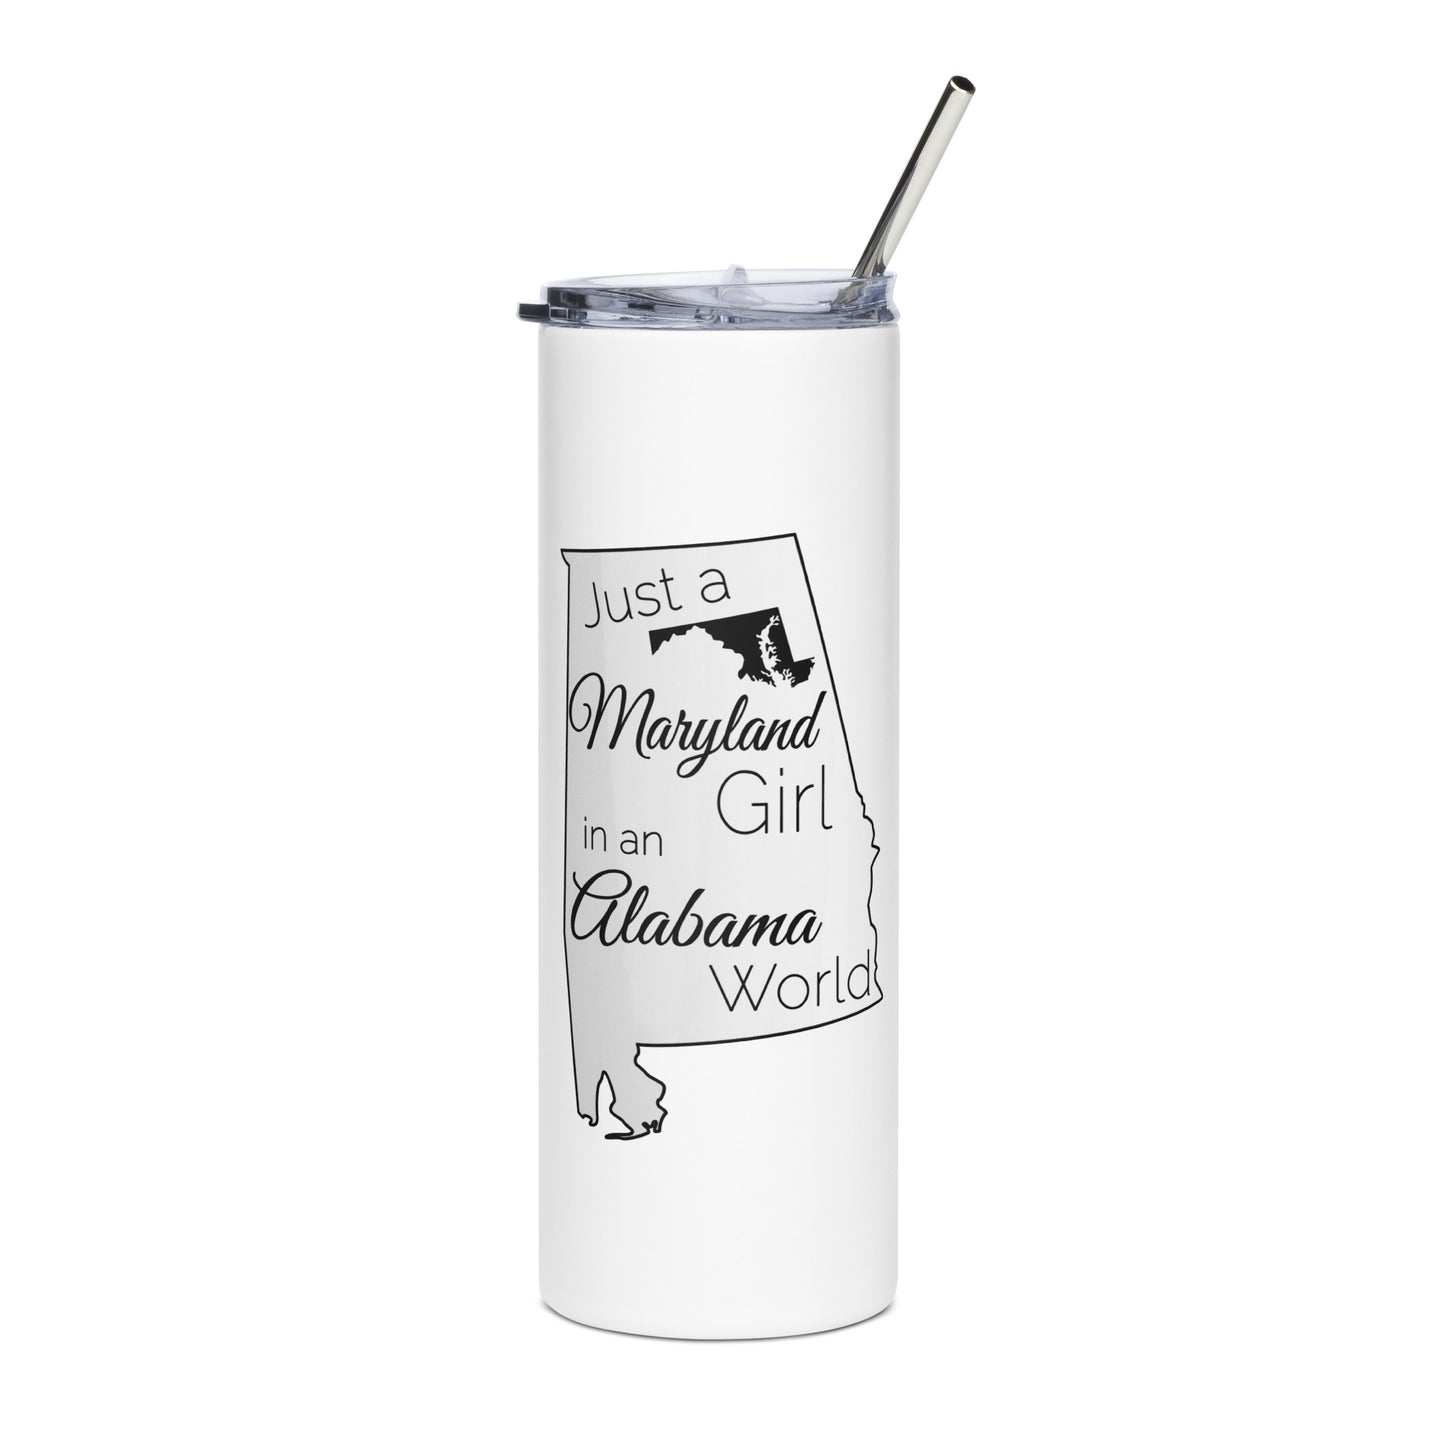 Just a Maryland Girl in an Alabama World Stainless steel tumbler